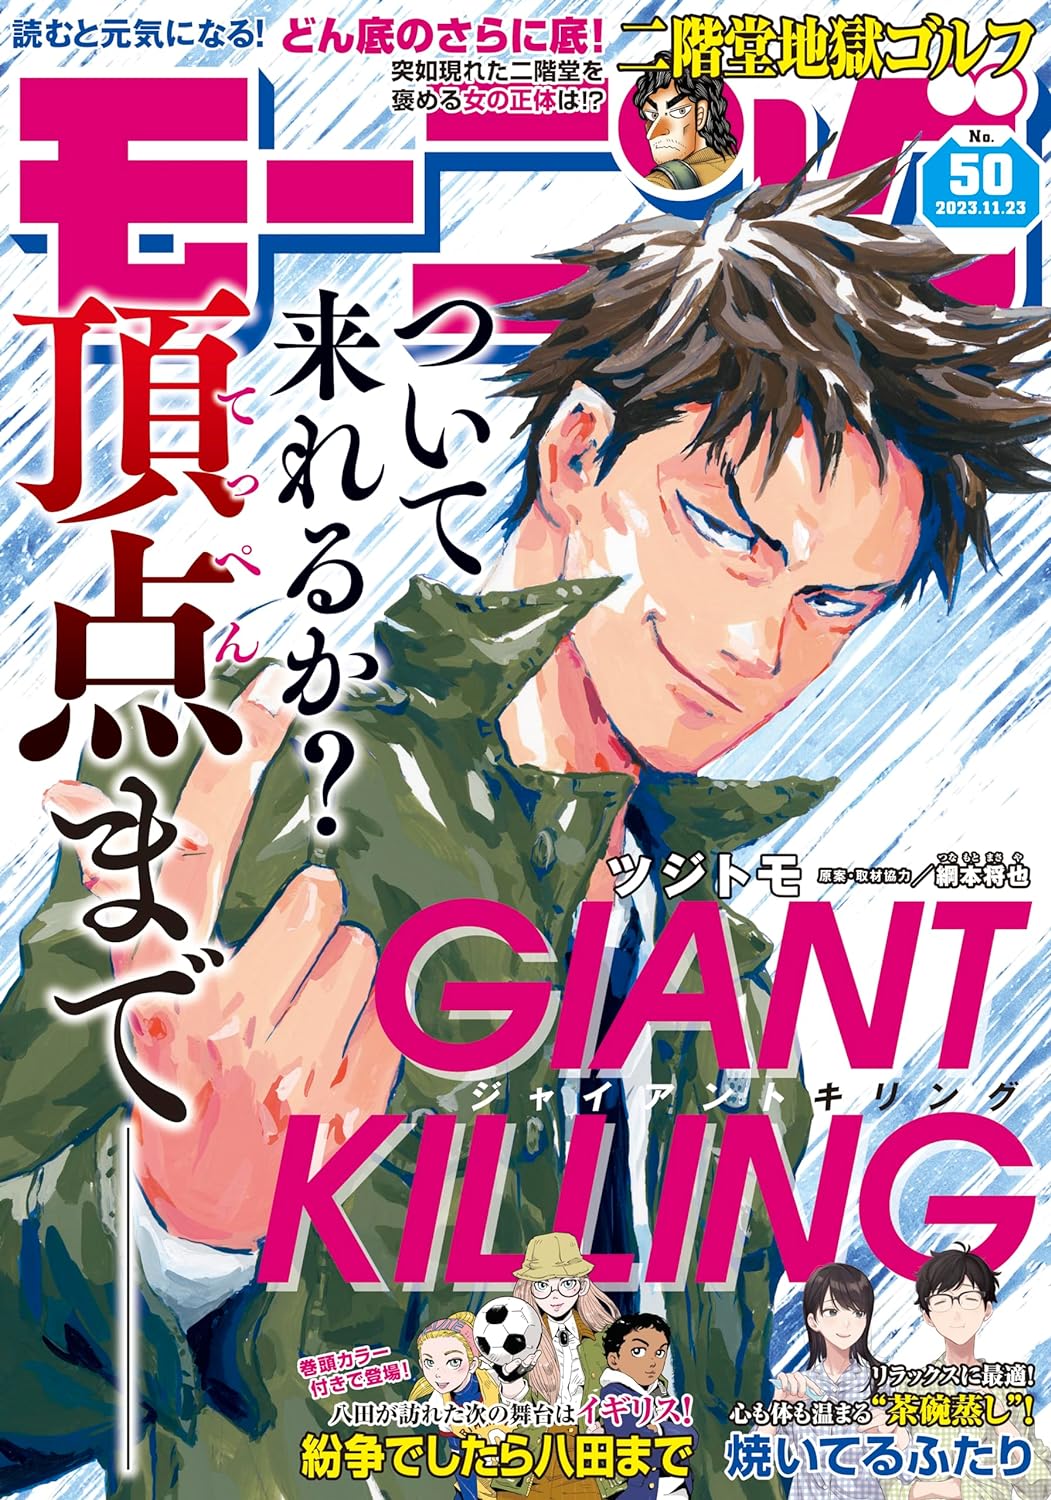 Giant Killing #50 - Vol. 50 (Issue)